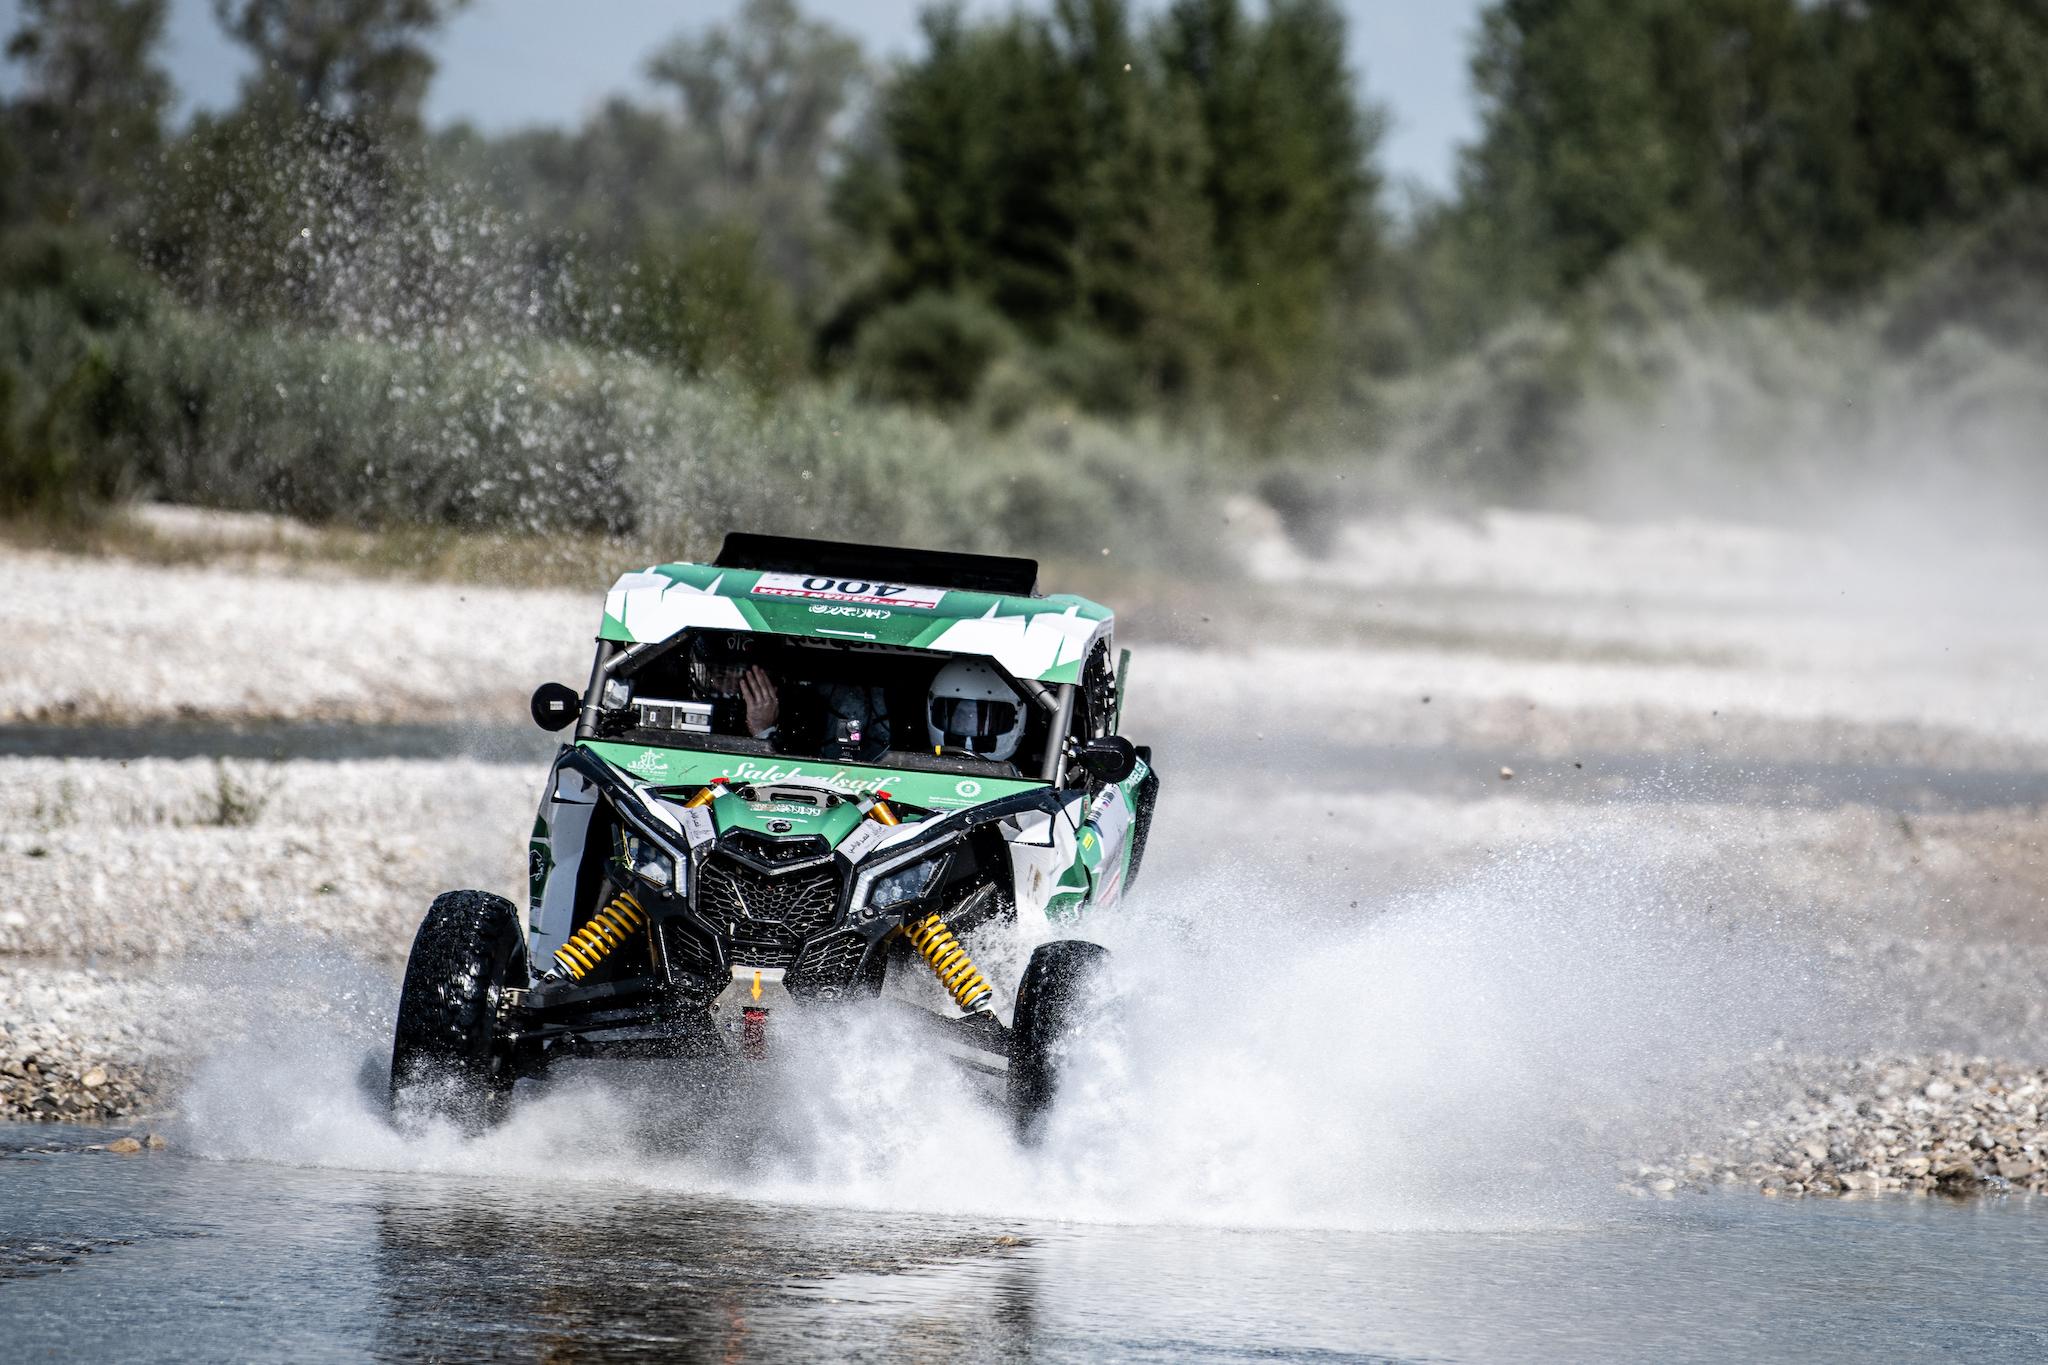 SOUTH RACING CAN-AM TEAM’S AL-SAIF AND RÉ SECURE TOP TWO PLACES IN FIA T4 CATEGORY AT ITALIAN BAJA